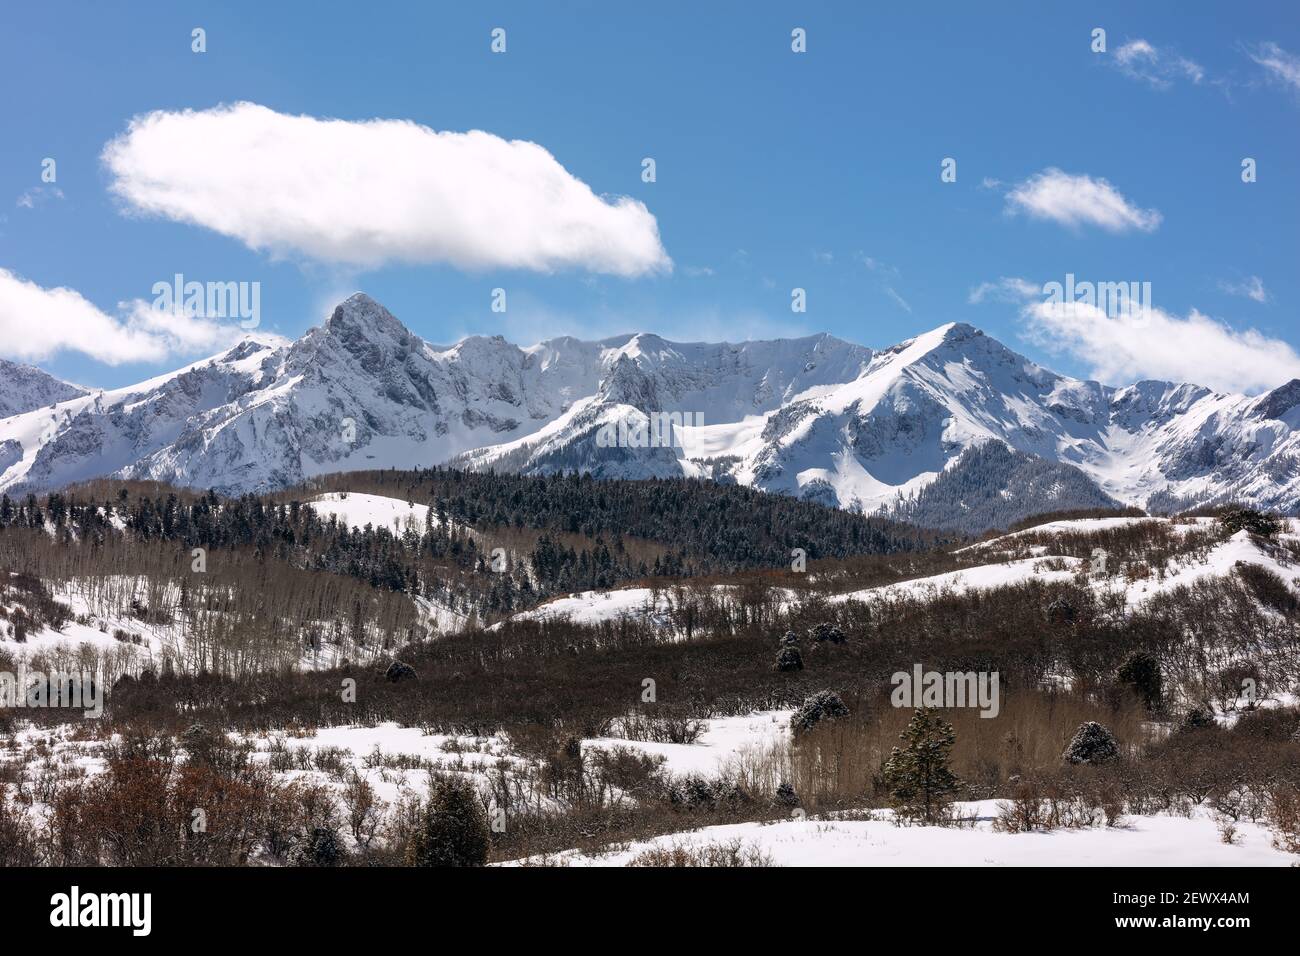 Scenic winter view of the Sneffels Range in the San Juan Mountains near Ridgway, Colorado Stock Photo